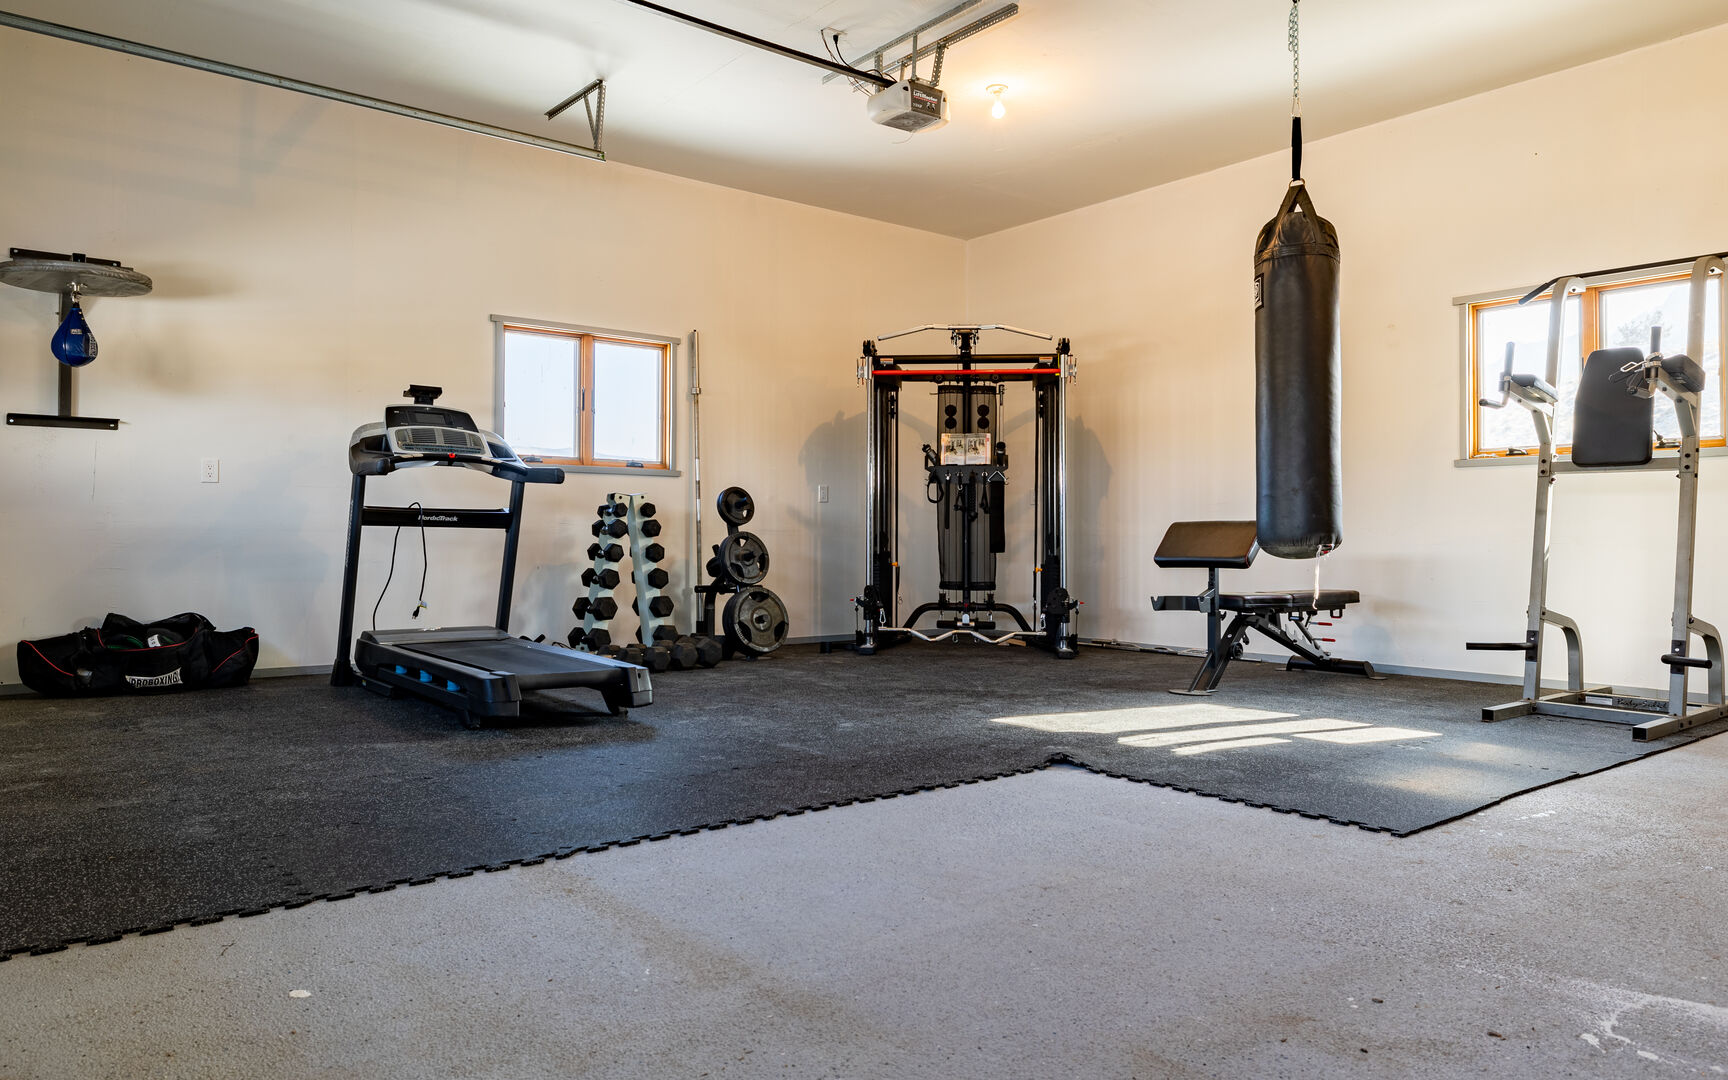 Gym area with freeweights, cardio equipment in main house garage